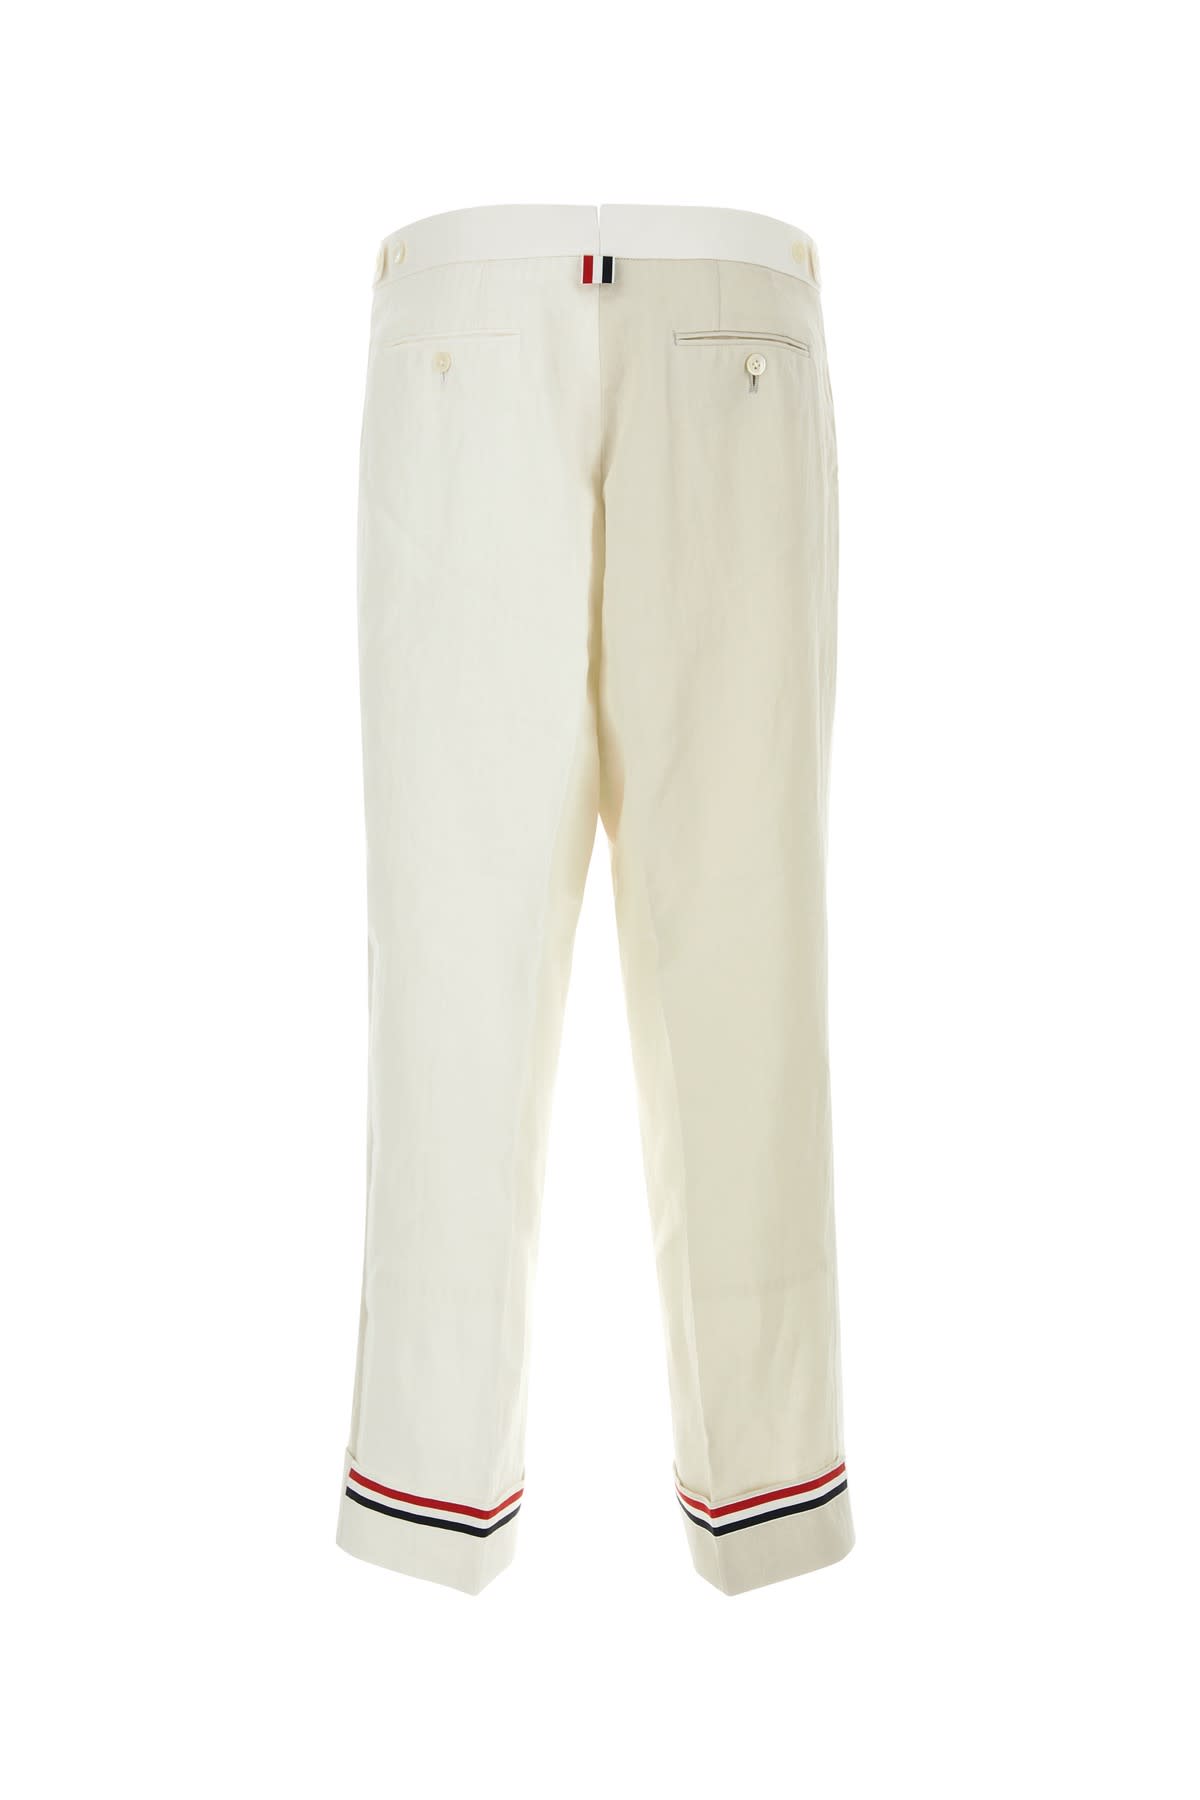 THOM BROWNE TWO-TONE LINEN PANT